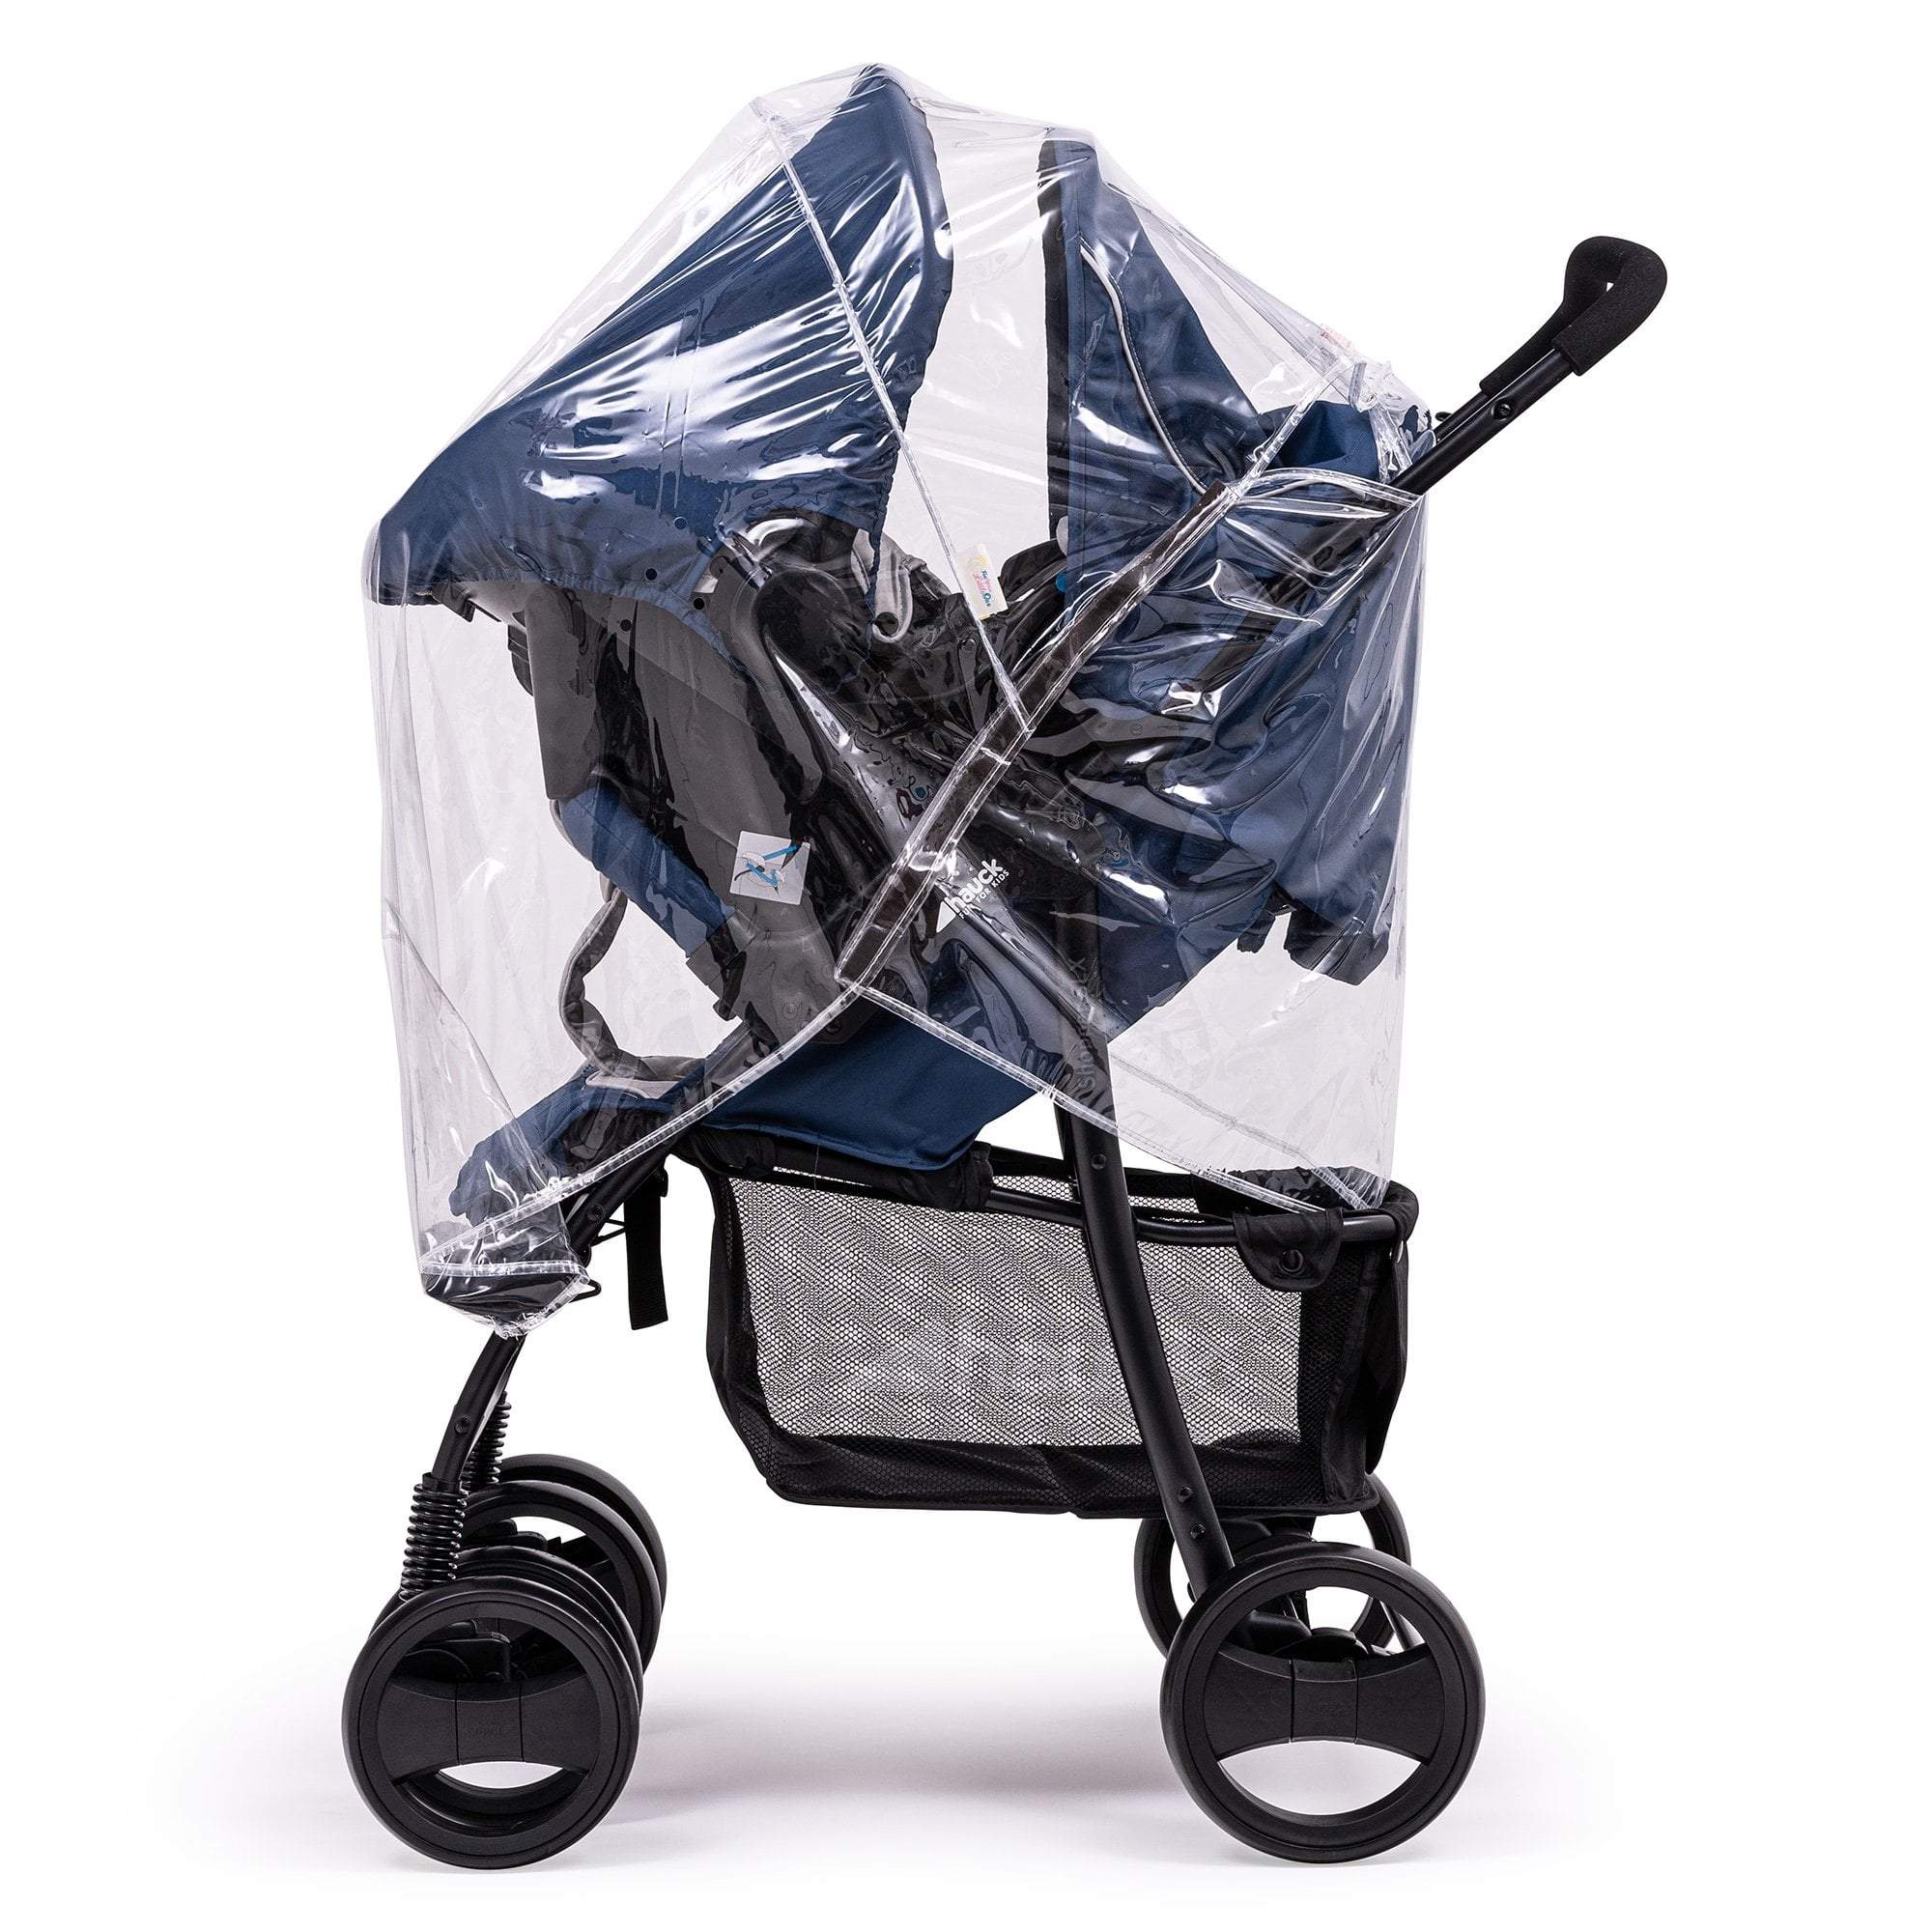 Travel System Raincover Compatible with Babybus - Fits All Models - For Your Little One